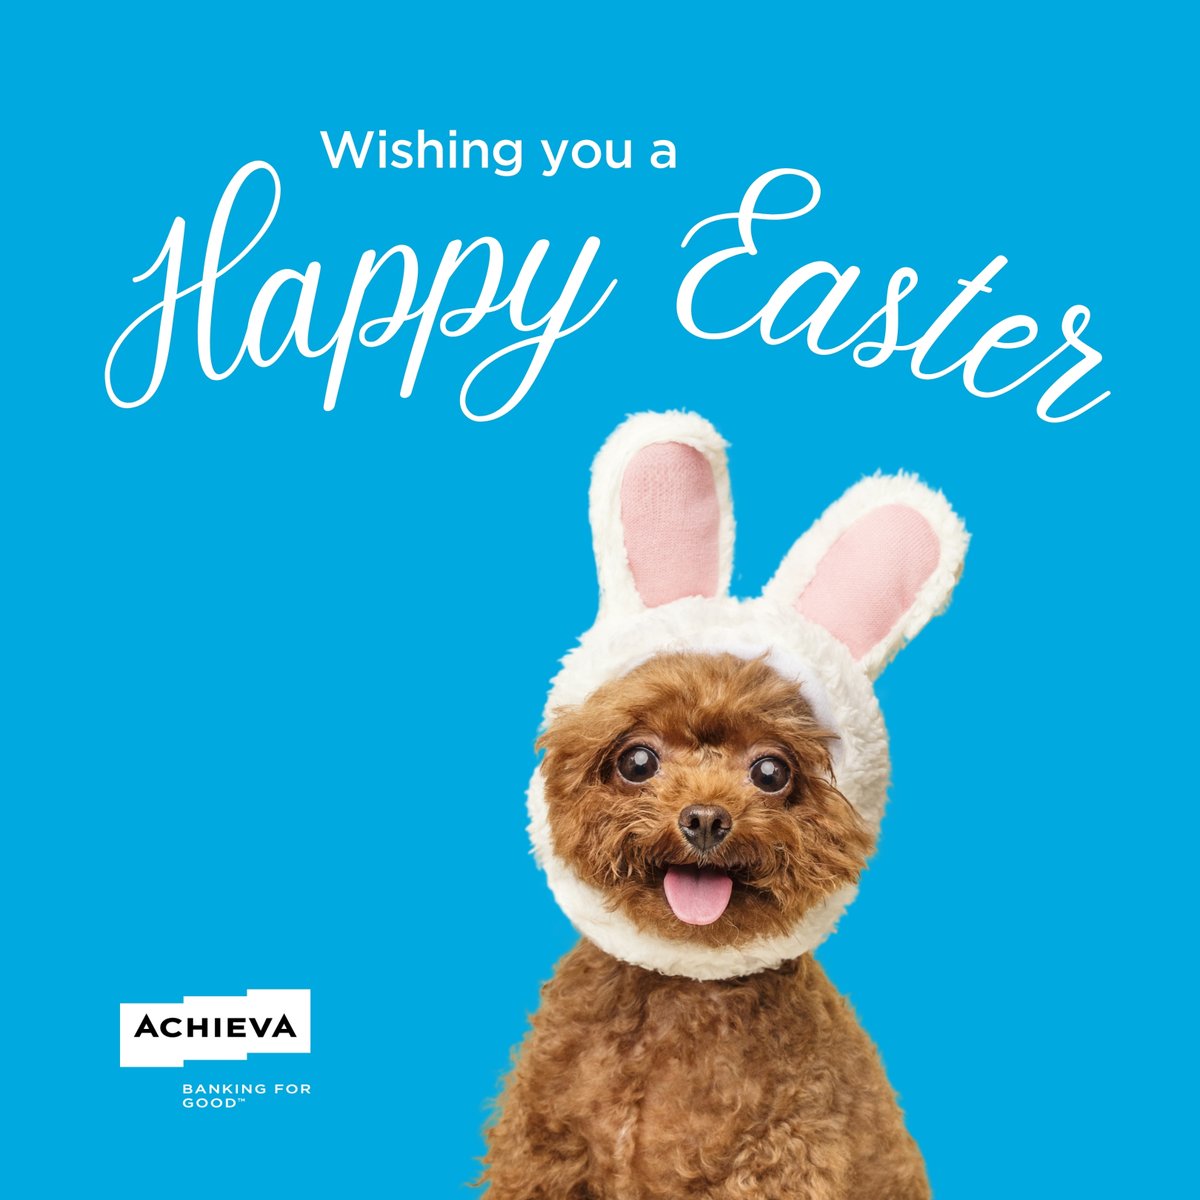 Happy Easter from Achieva Credit Union!